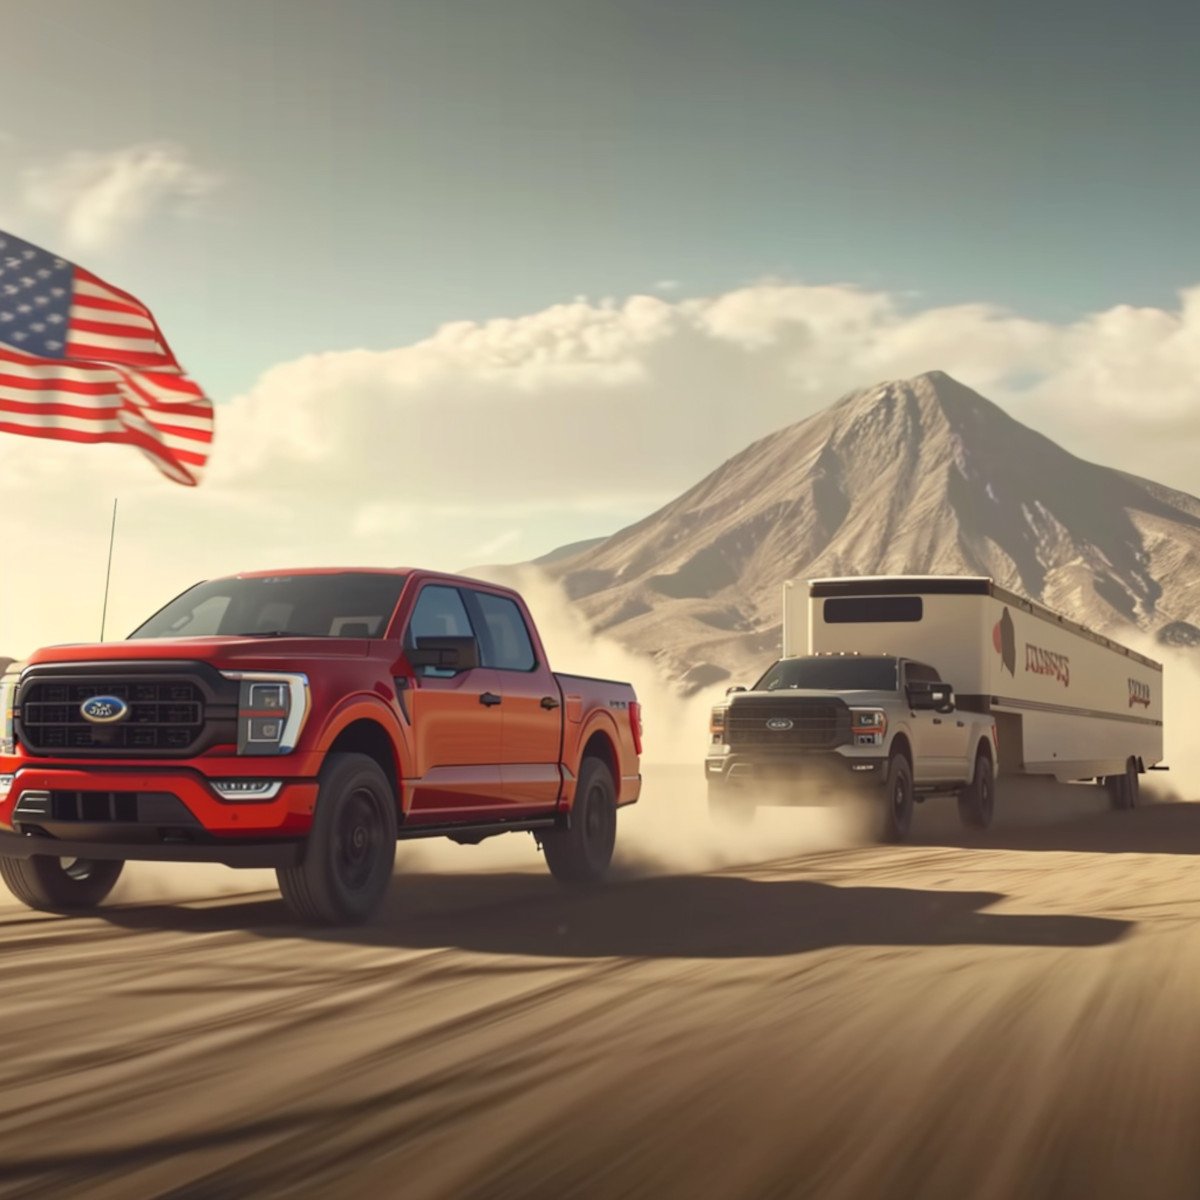 
A life-like representation of a 2023 Ford F-150 XL SuperCrew,  speeding through the desert, moving fast with dust, one large American Flag blowing in the sky in the background